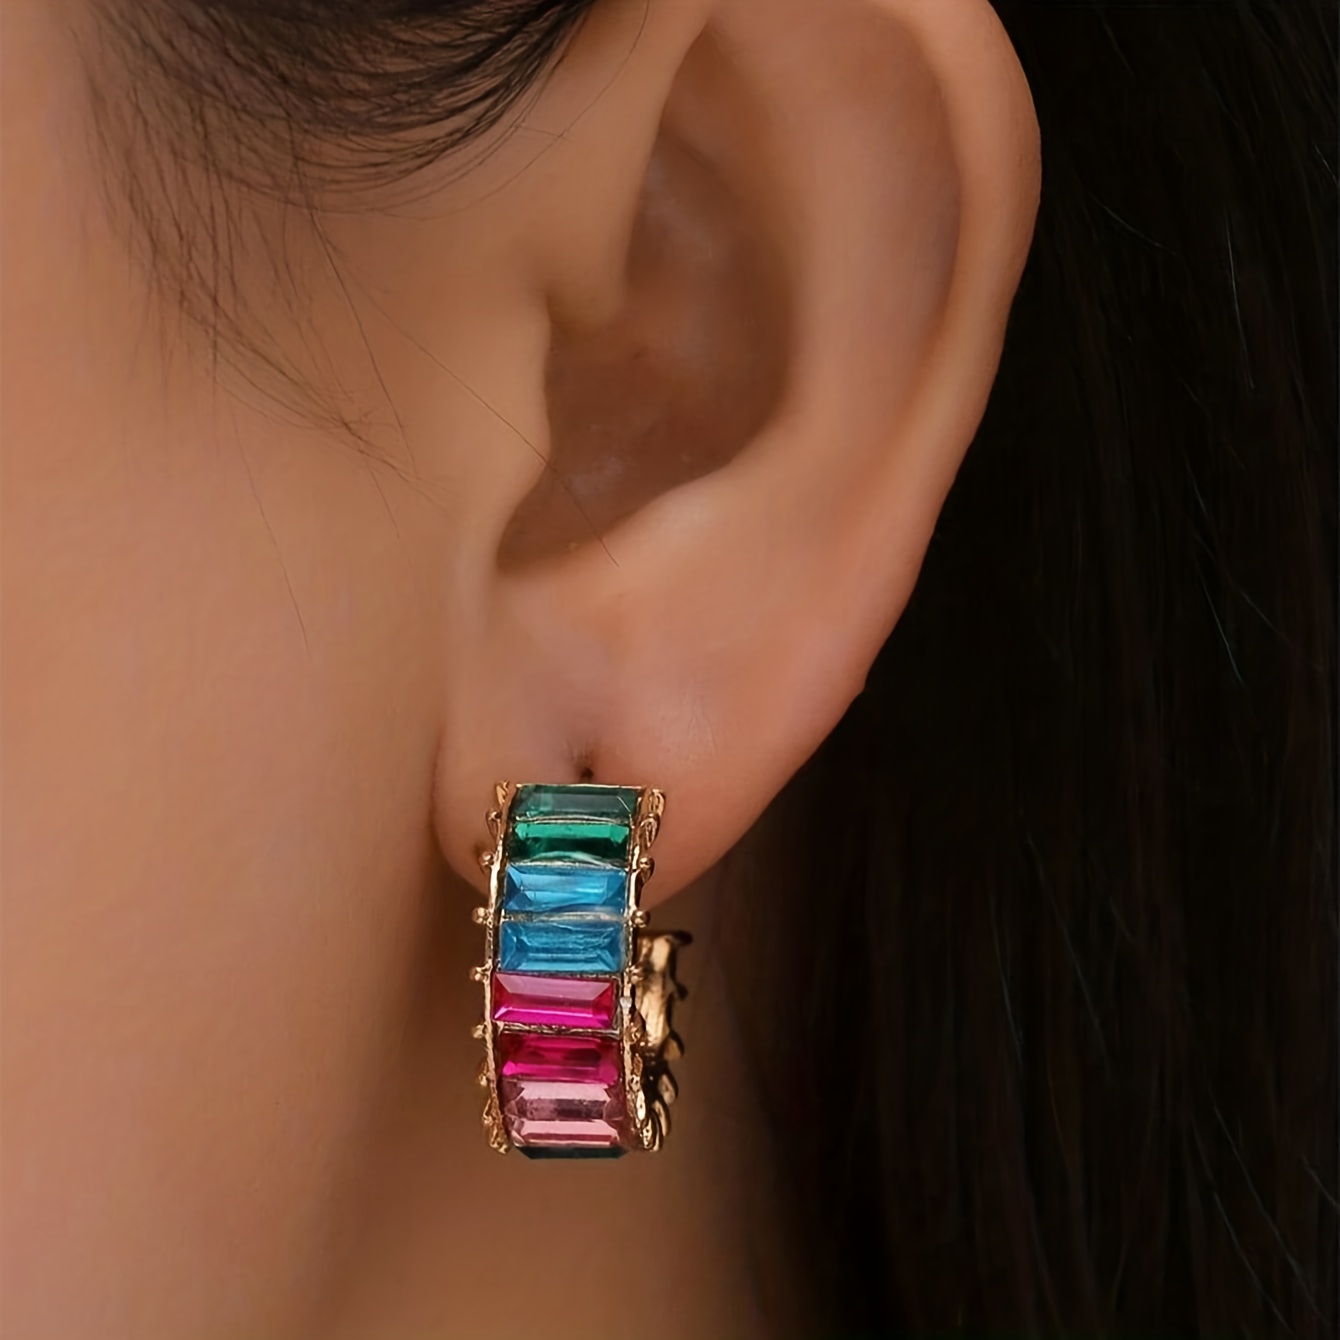 

Colorful Creative C Shaped Hoop Earrings Zinc Alloy Jewelry Delicate Gift For Women Christmas Party Ear Accessories